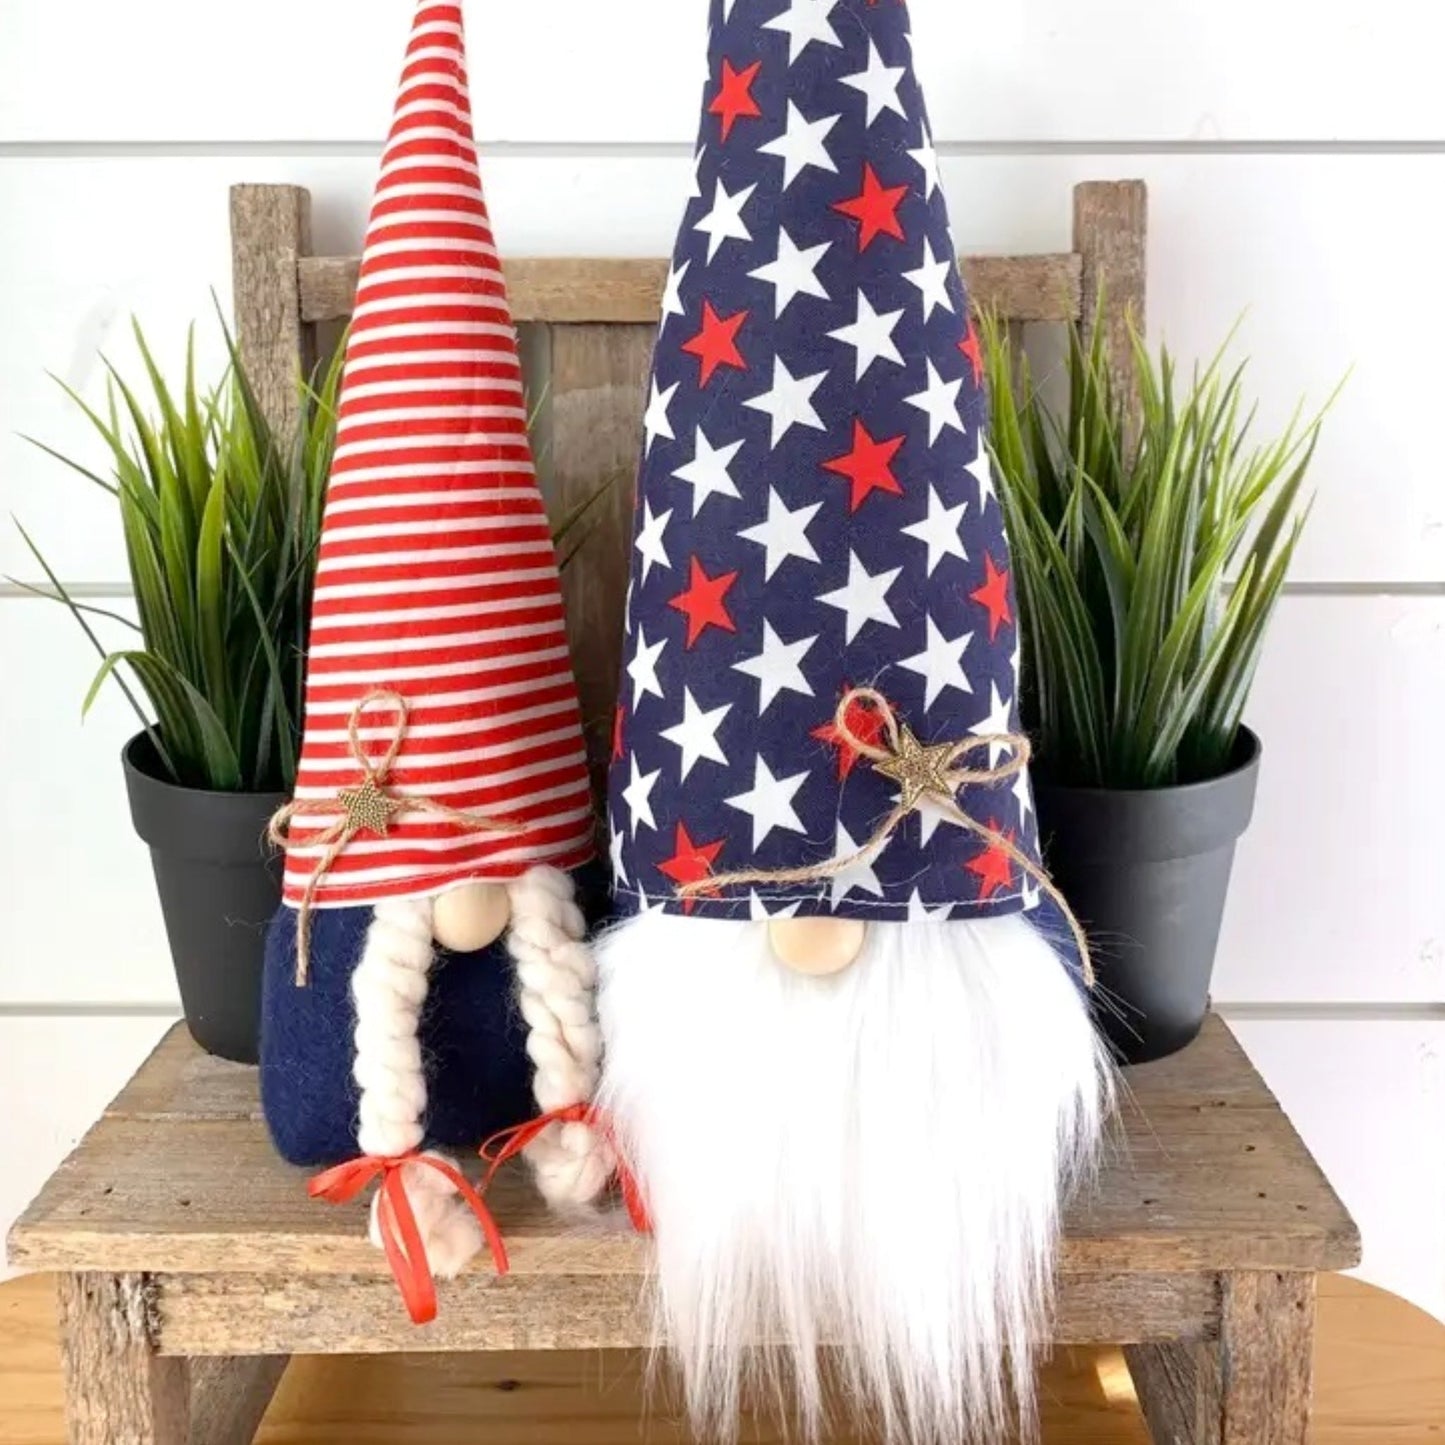 Pair of Handmade Patriotic Gnomes Couple - Made in the USA